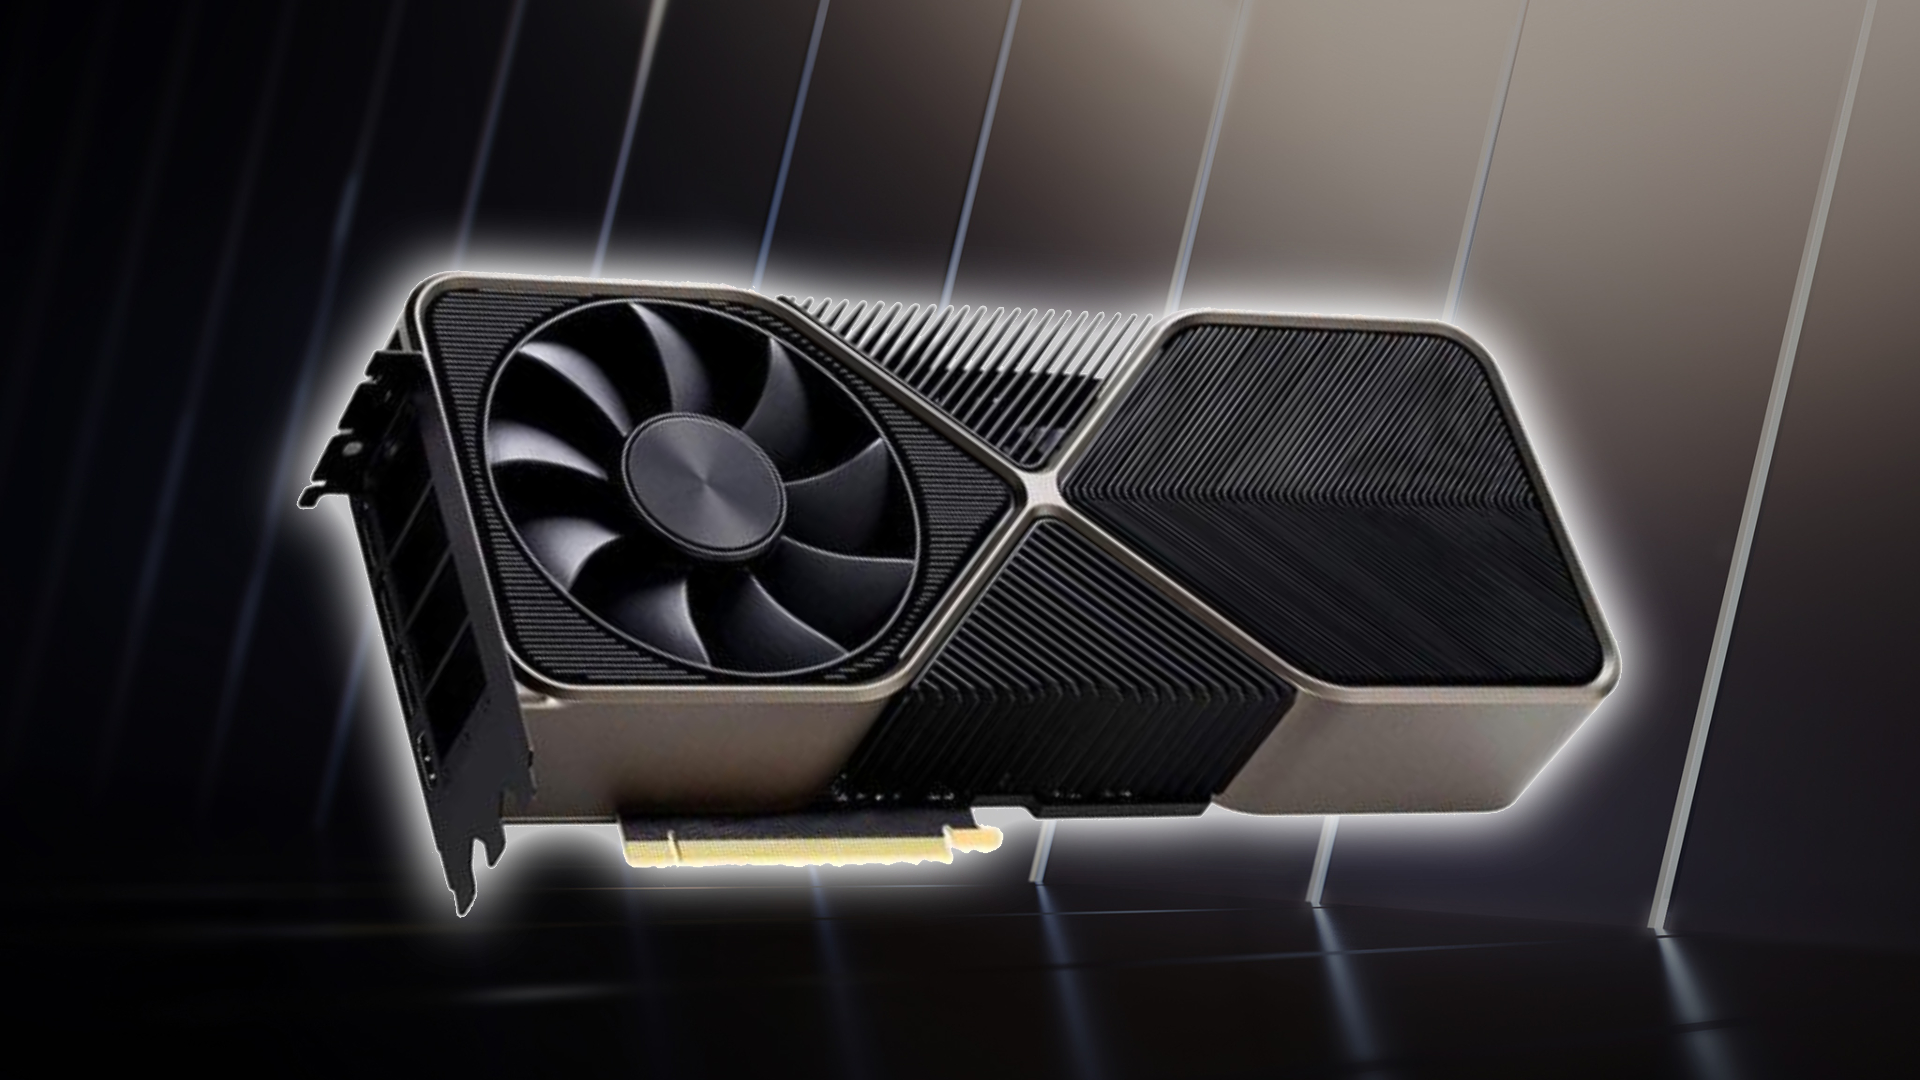 Nvidia RTX 4000 launch may kick off with RTX 4090 in October